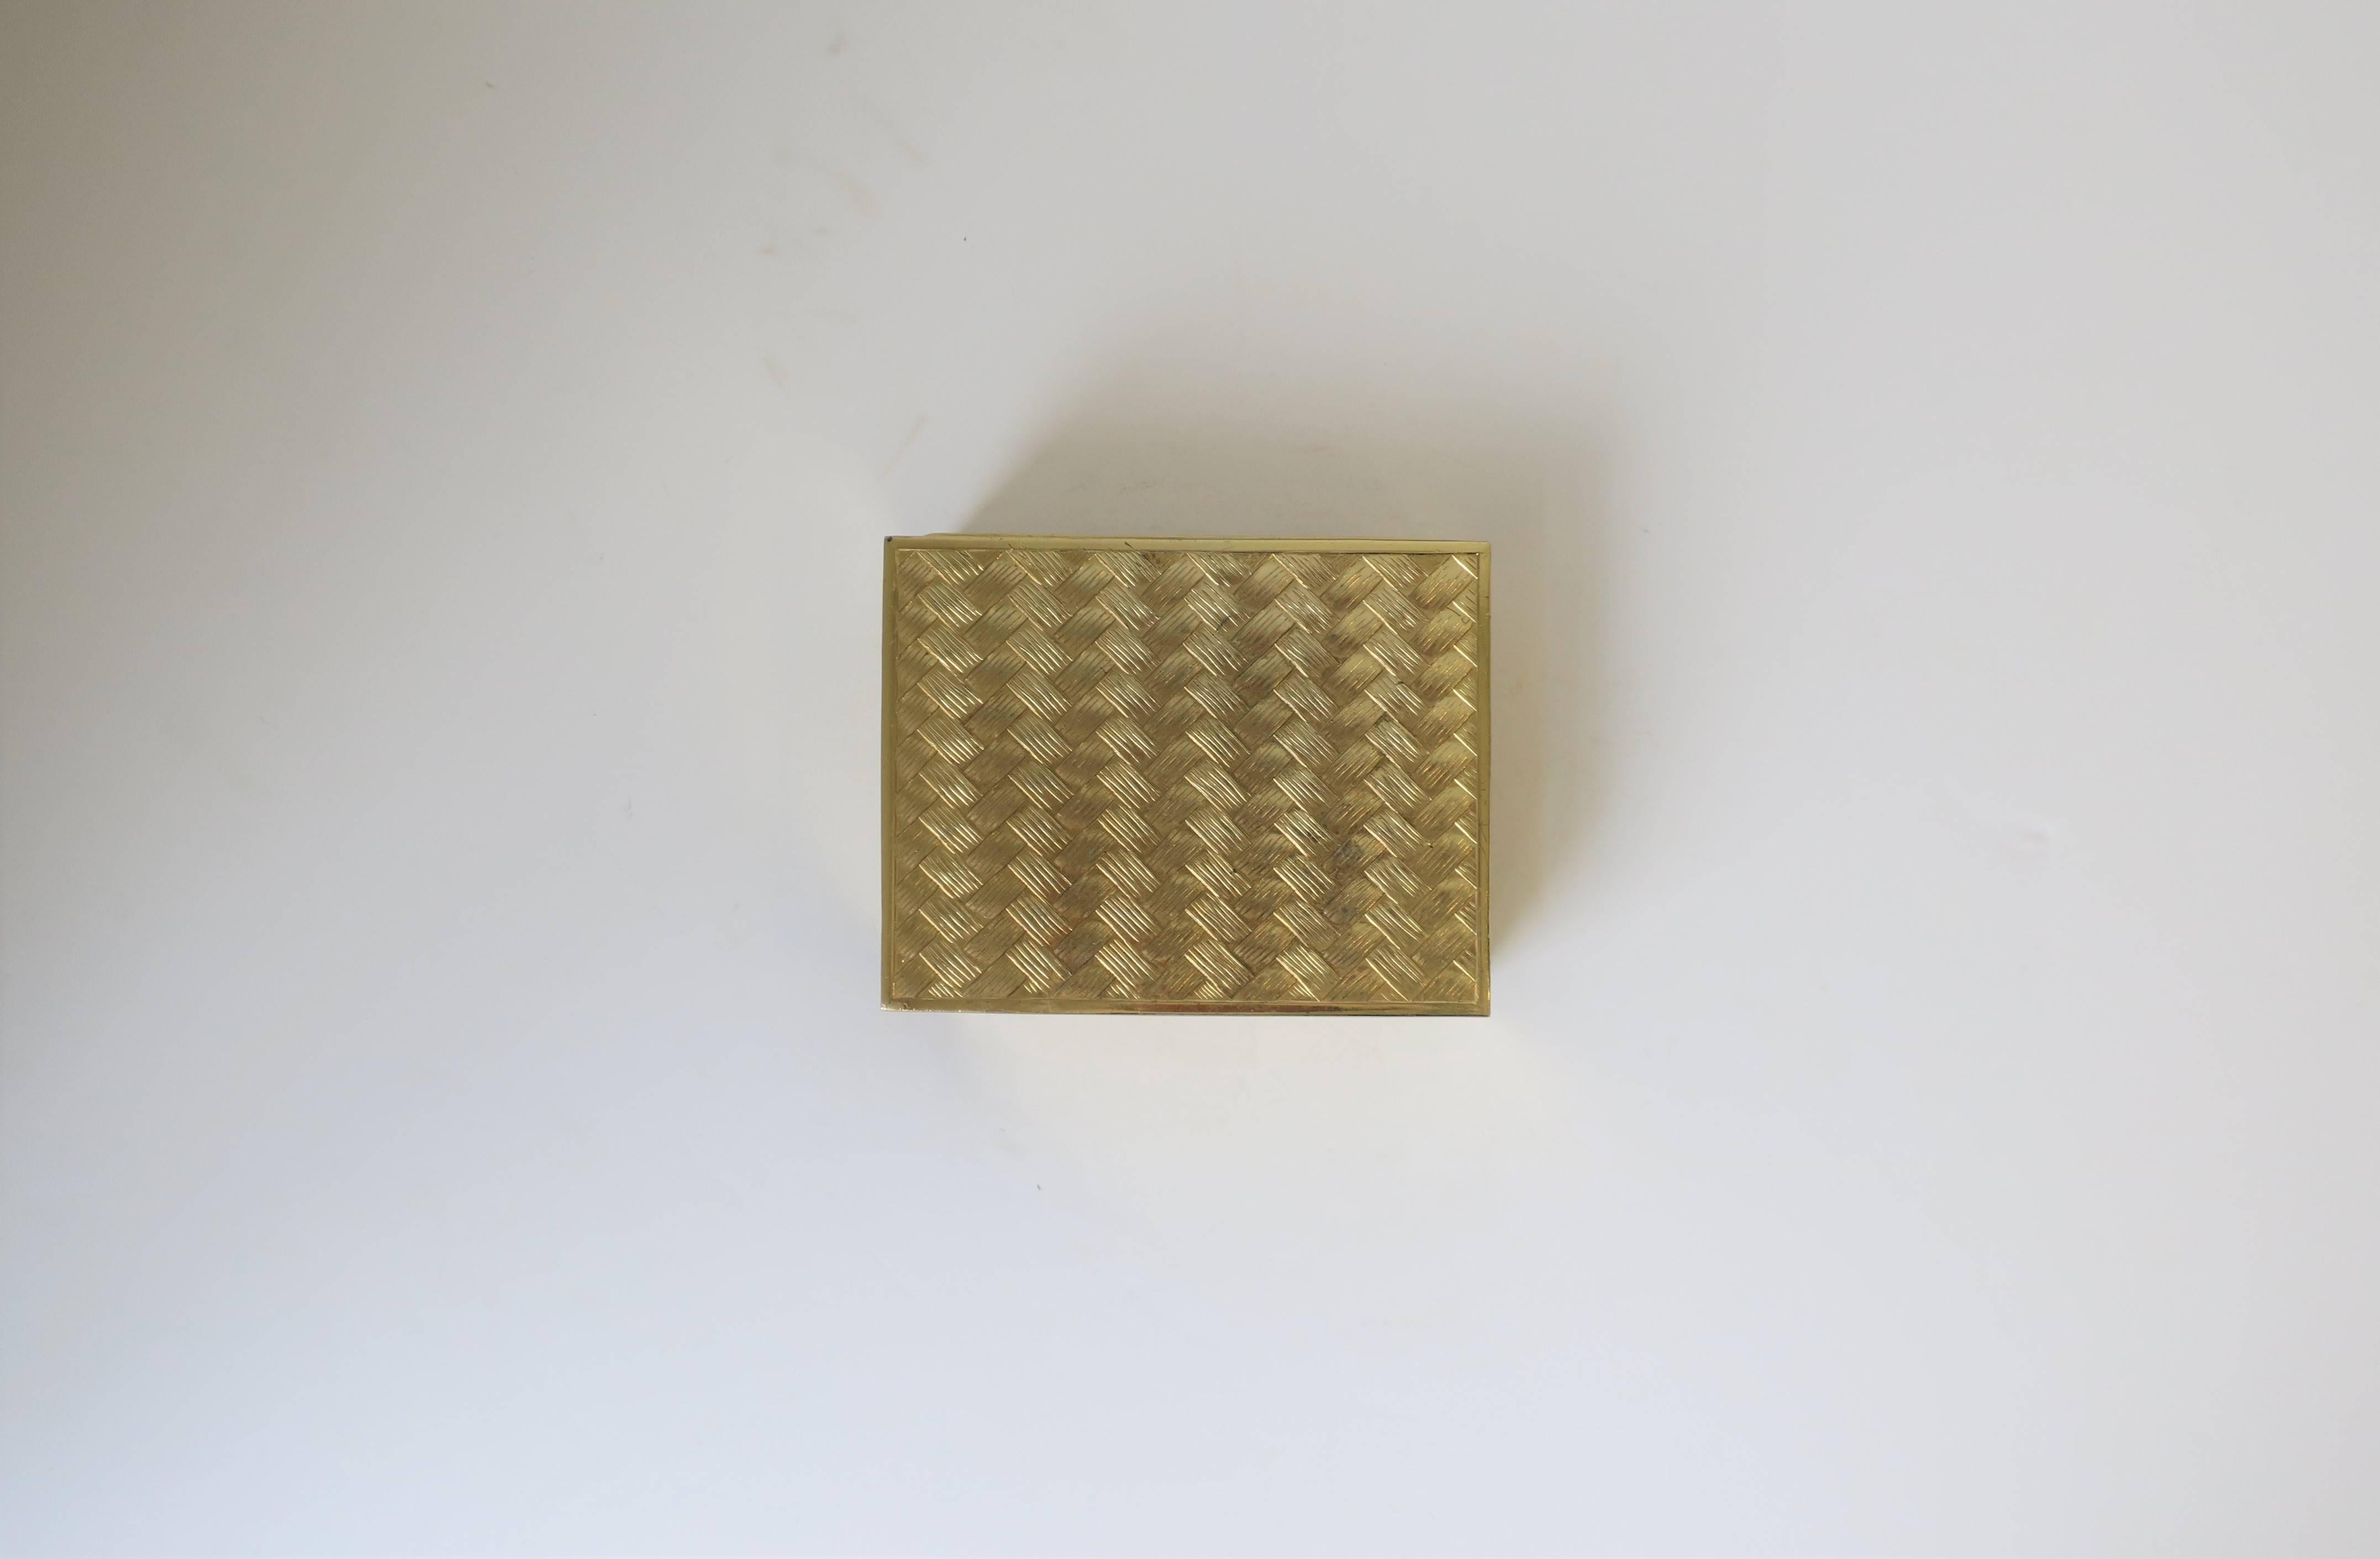 A chic vintage Italian shinny gold brass box with decorative Chevron or parquet designed top lid and wood lining, circa 1970s, Italy. Easy open/close. Convenient for jewelry or other small items on a desk, vanity, nightstand area, etc. Box may have